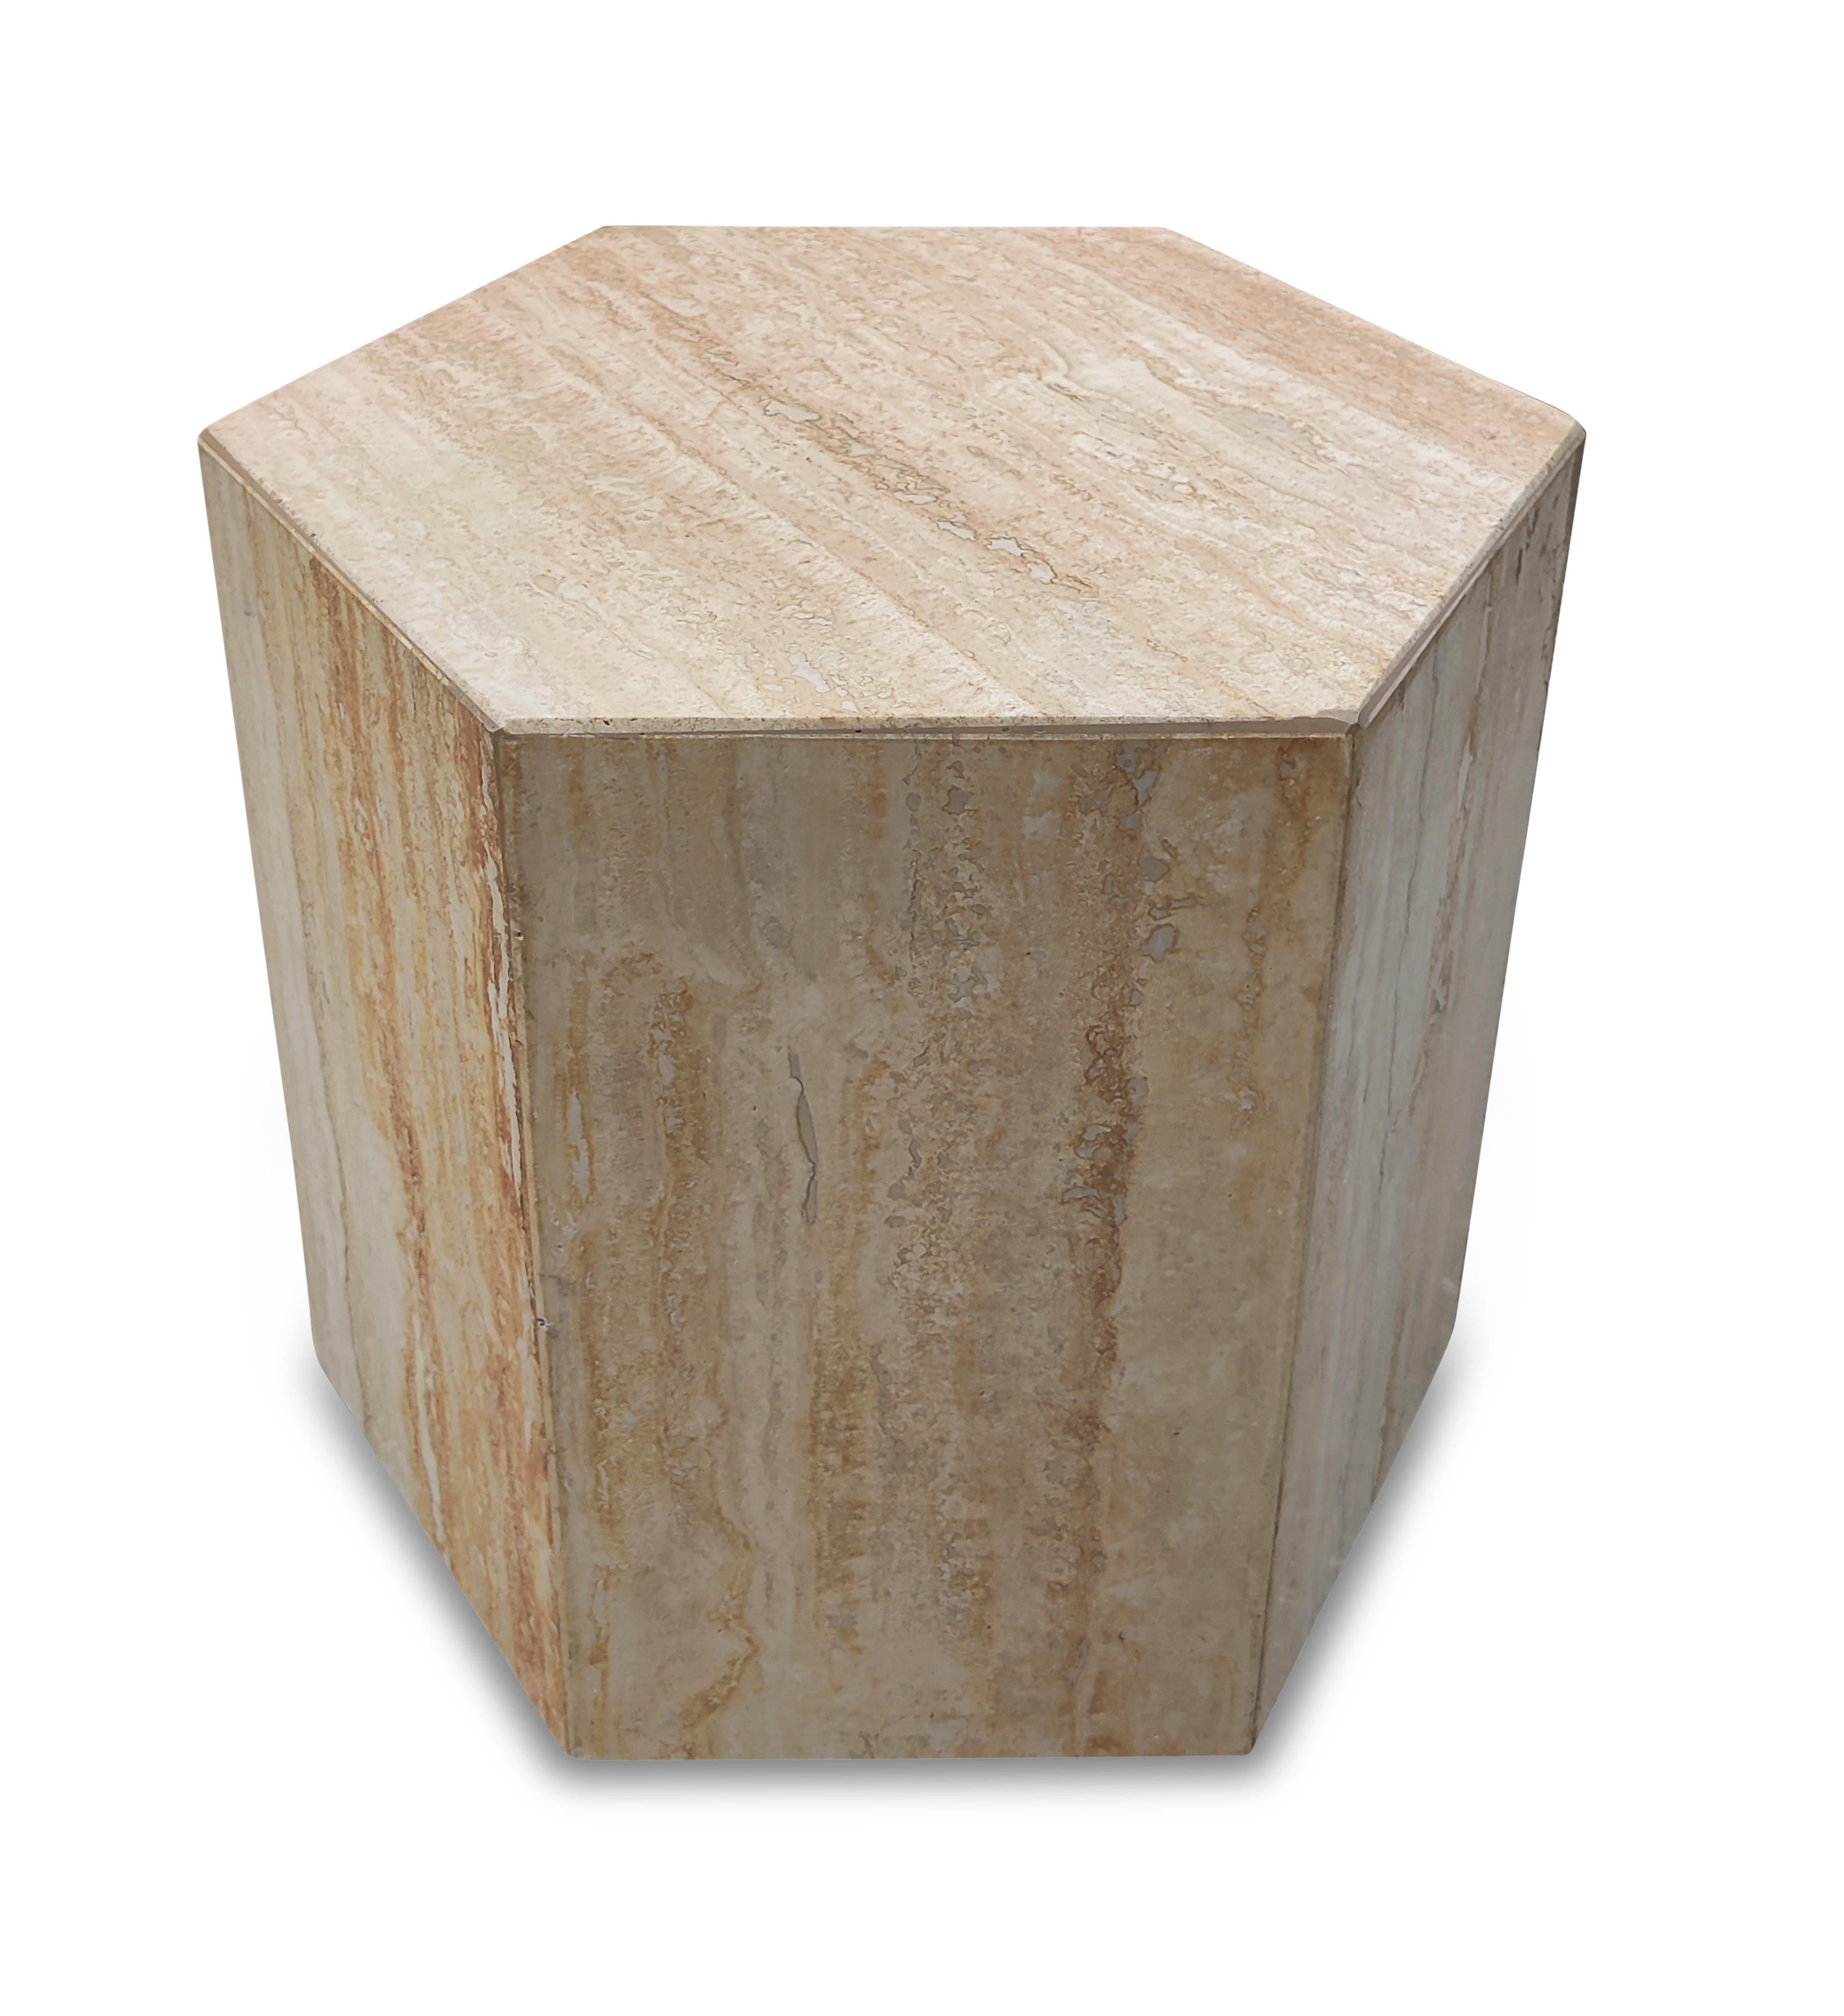 Italian travertine marble haxagonal side table or pedestal. The polished travertine is beige and cream colored with beautiful variation. Notice in some areas the grain develops a red or rust-colored hue, which adds to its beauty and warmth.